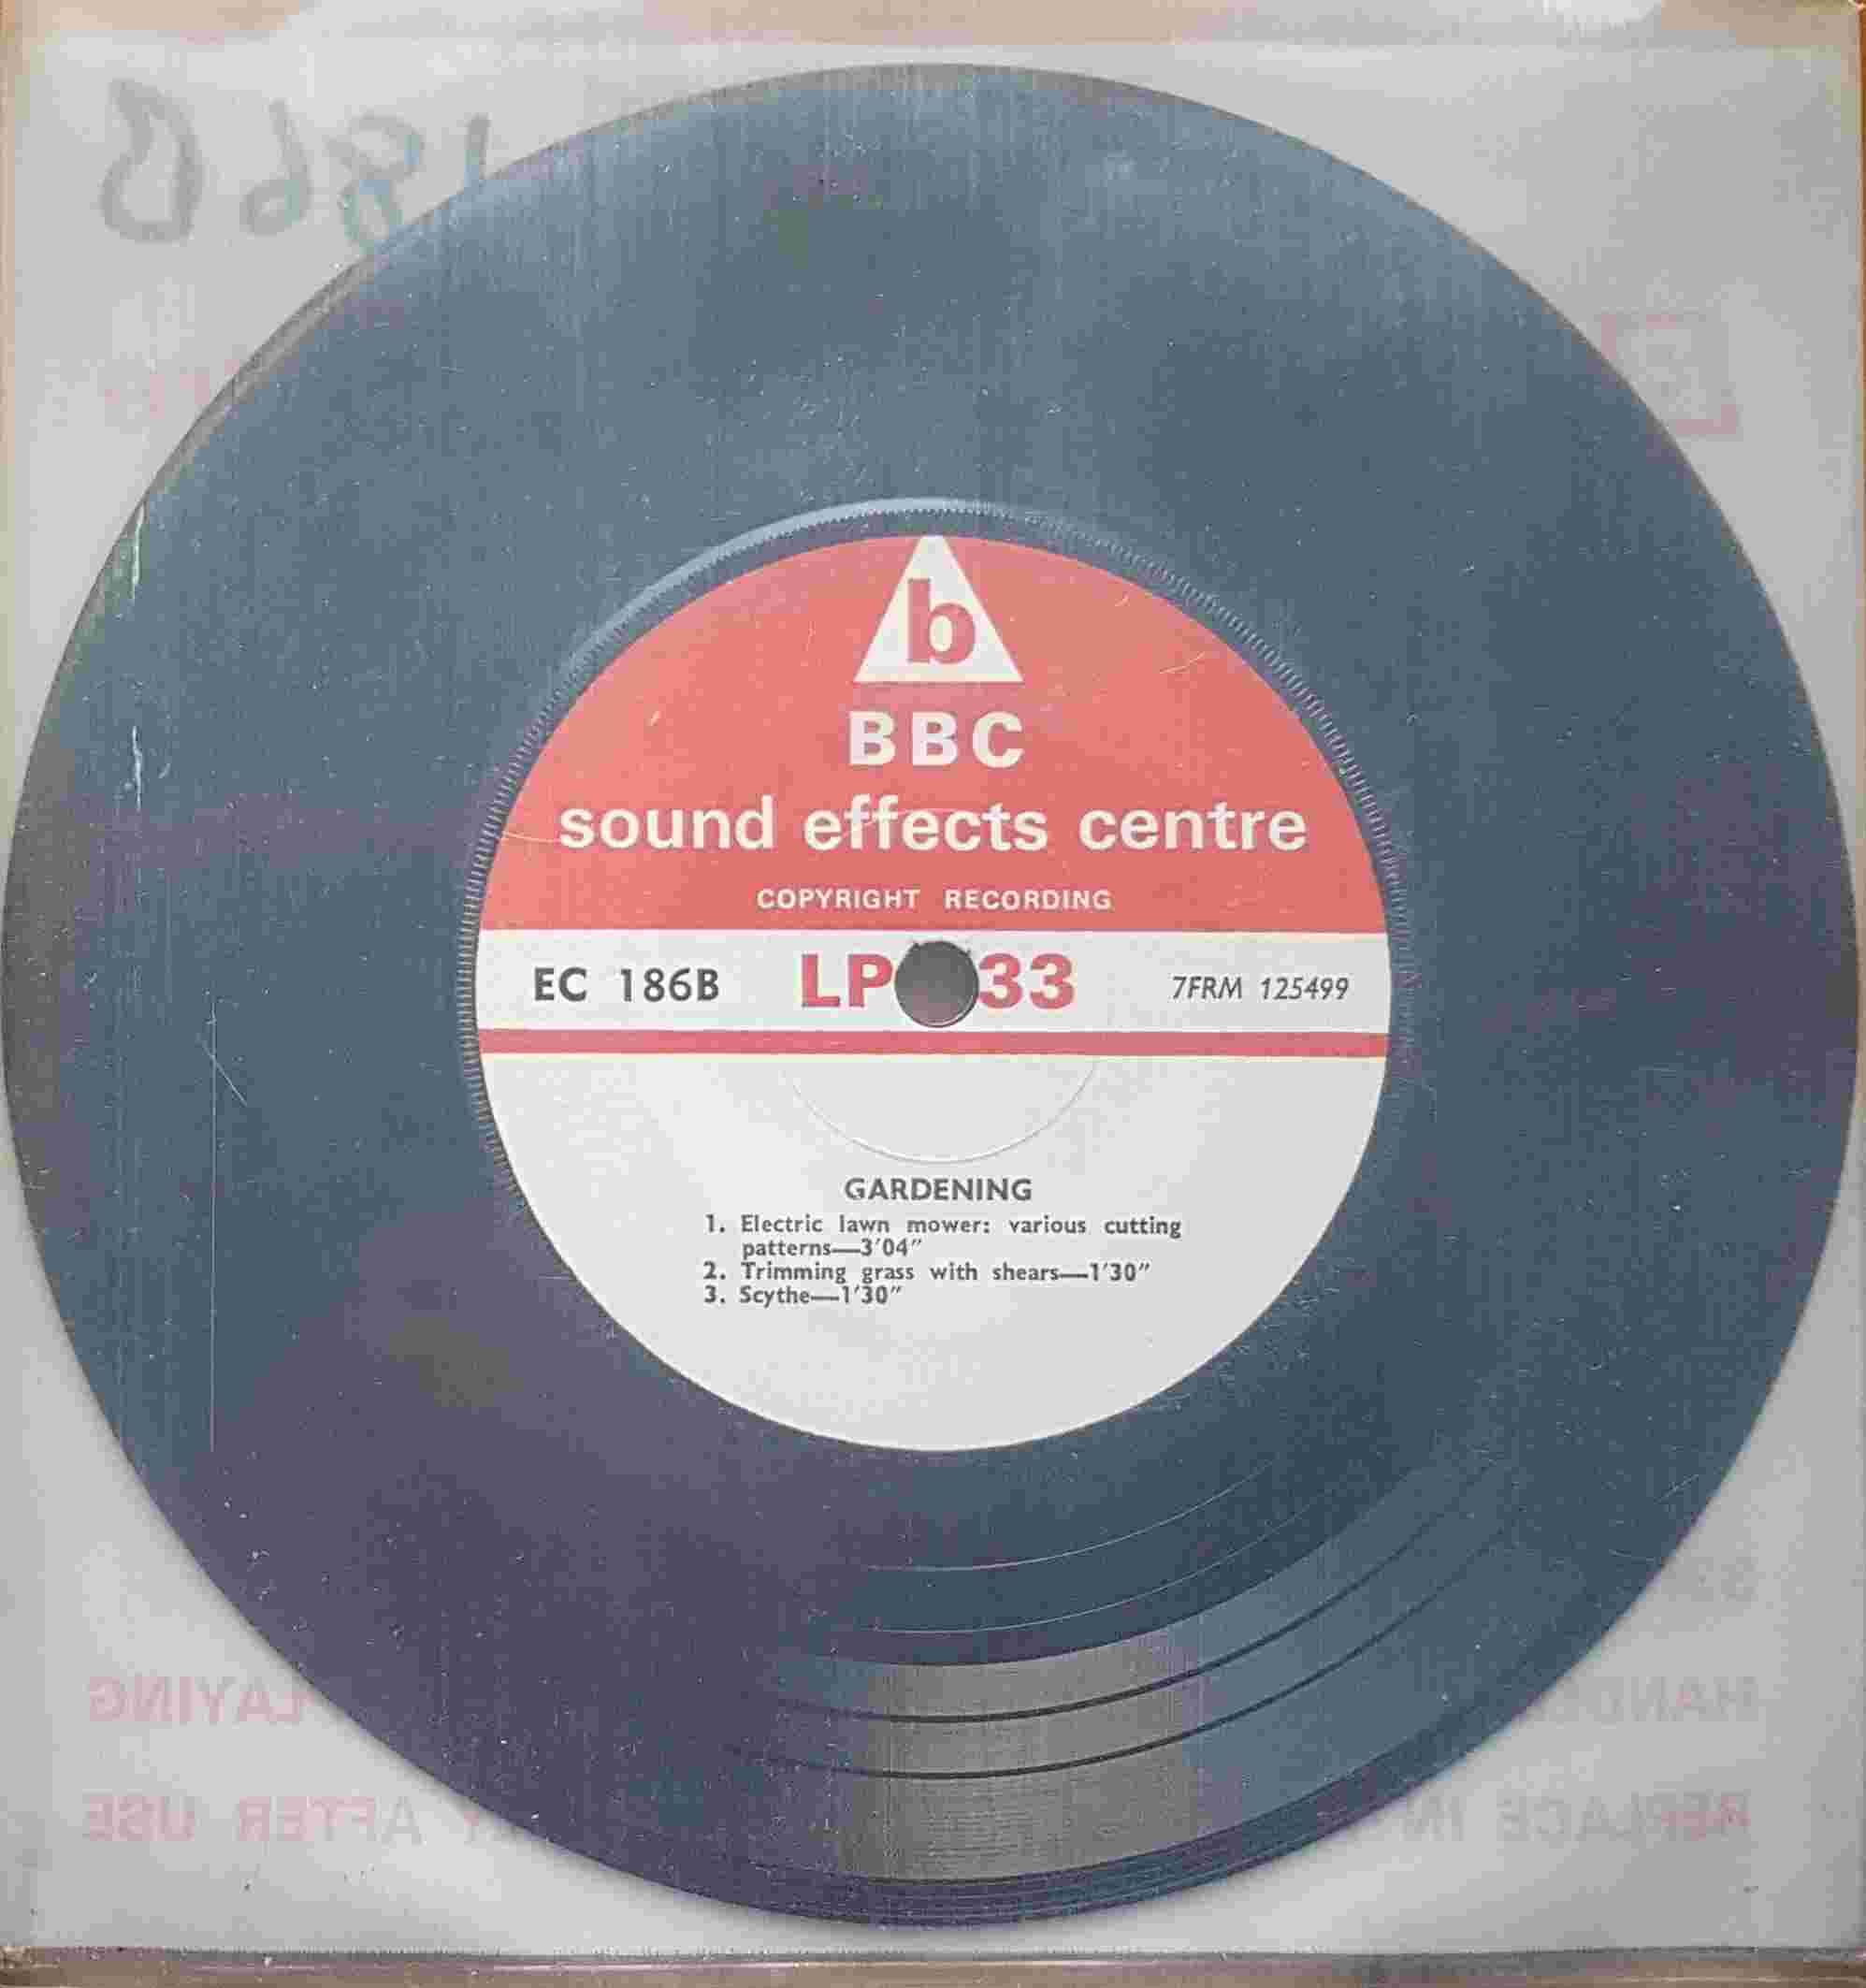 Picture of EC 186B Gardening by artist Not registered from the BBC records and Tapes library